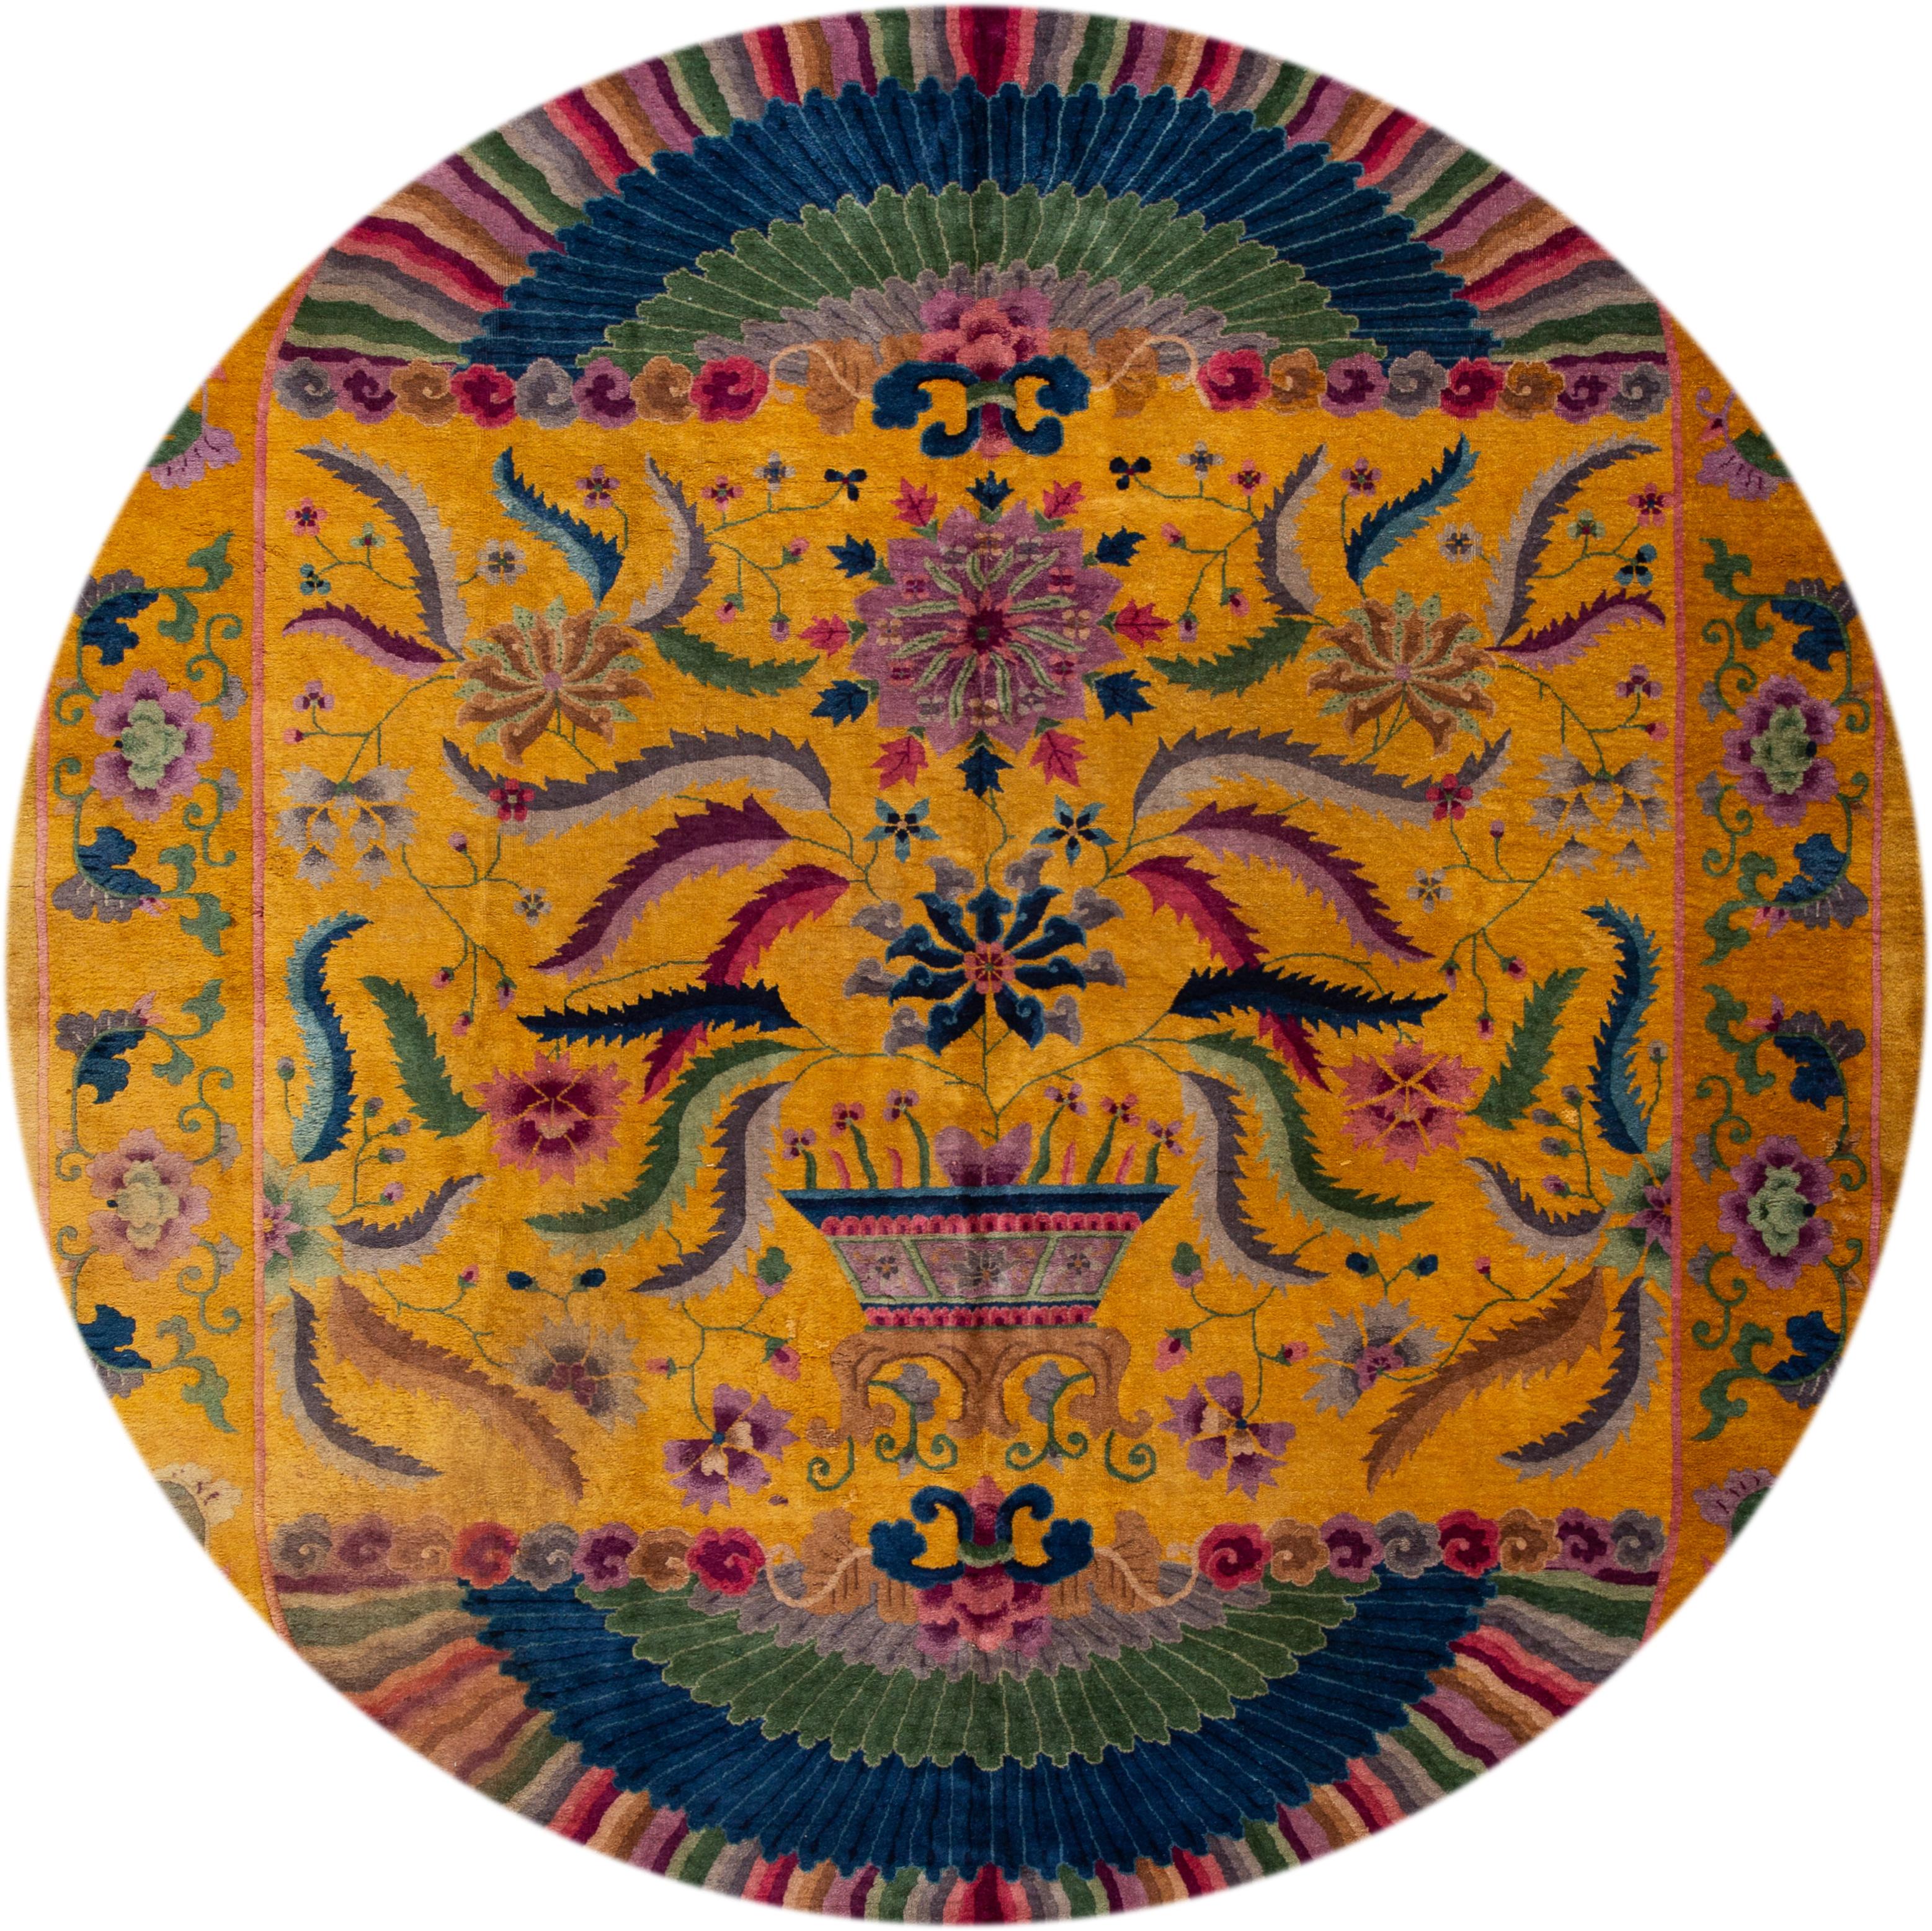 Beautiful antique Chinese Art Deco rug circa 1920, hand knotted wool with a golden yellow field, multicolor accents in an all-over design.
This rug measures 10' 1